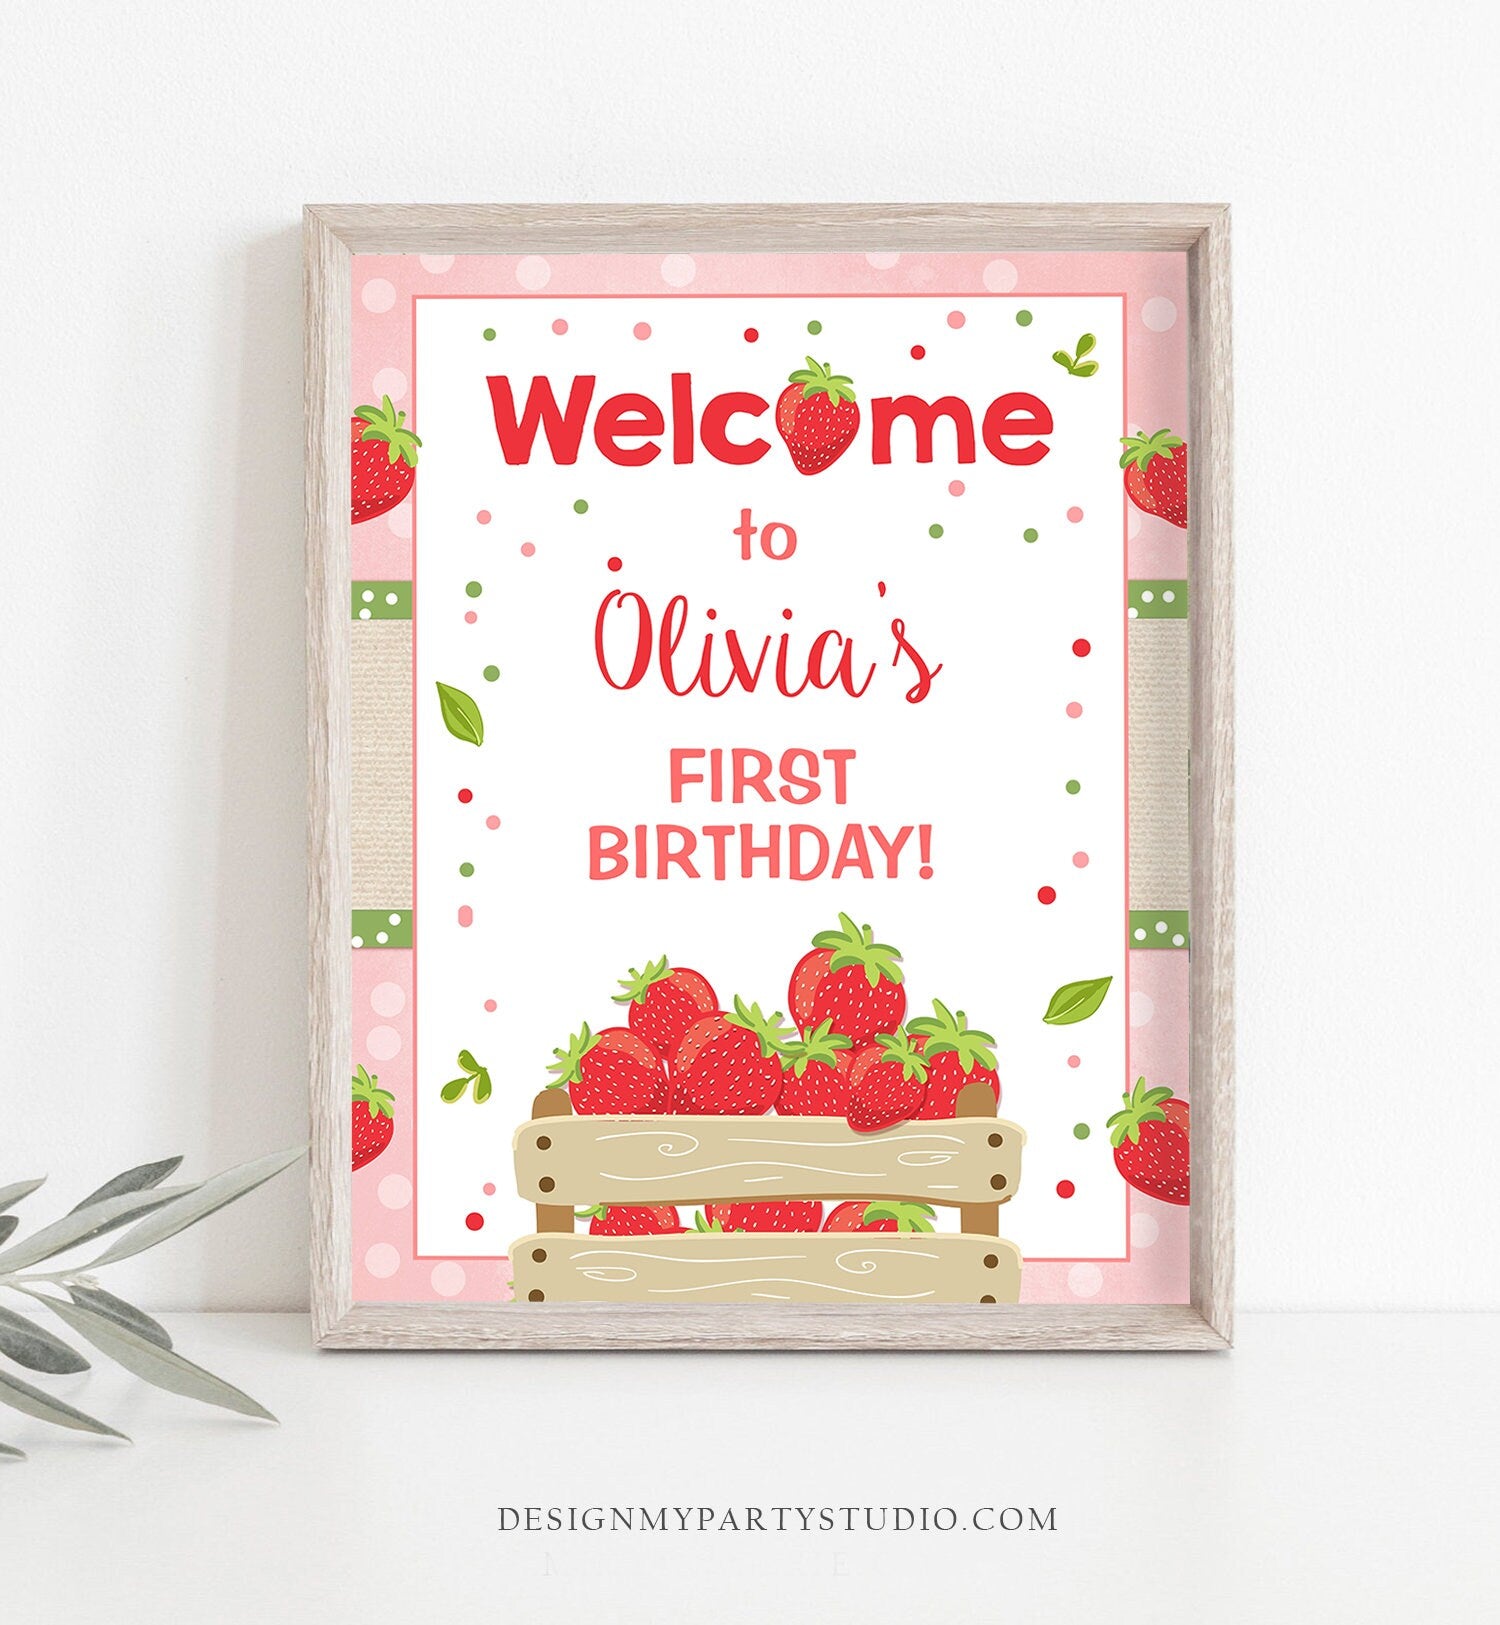 Editable Strawberry Welcome Sign Strawberry Birthday Party Welcome Farmers Market Girl Summer Fruit Berry Template PRINTABLE Corjl 0091